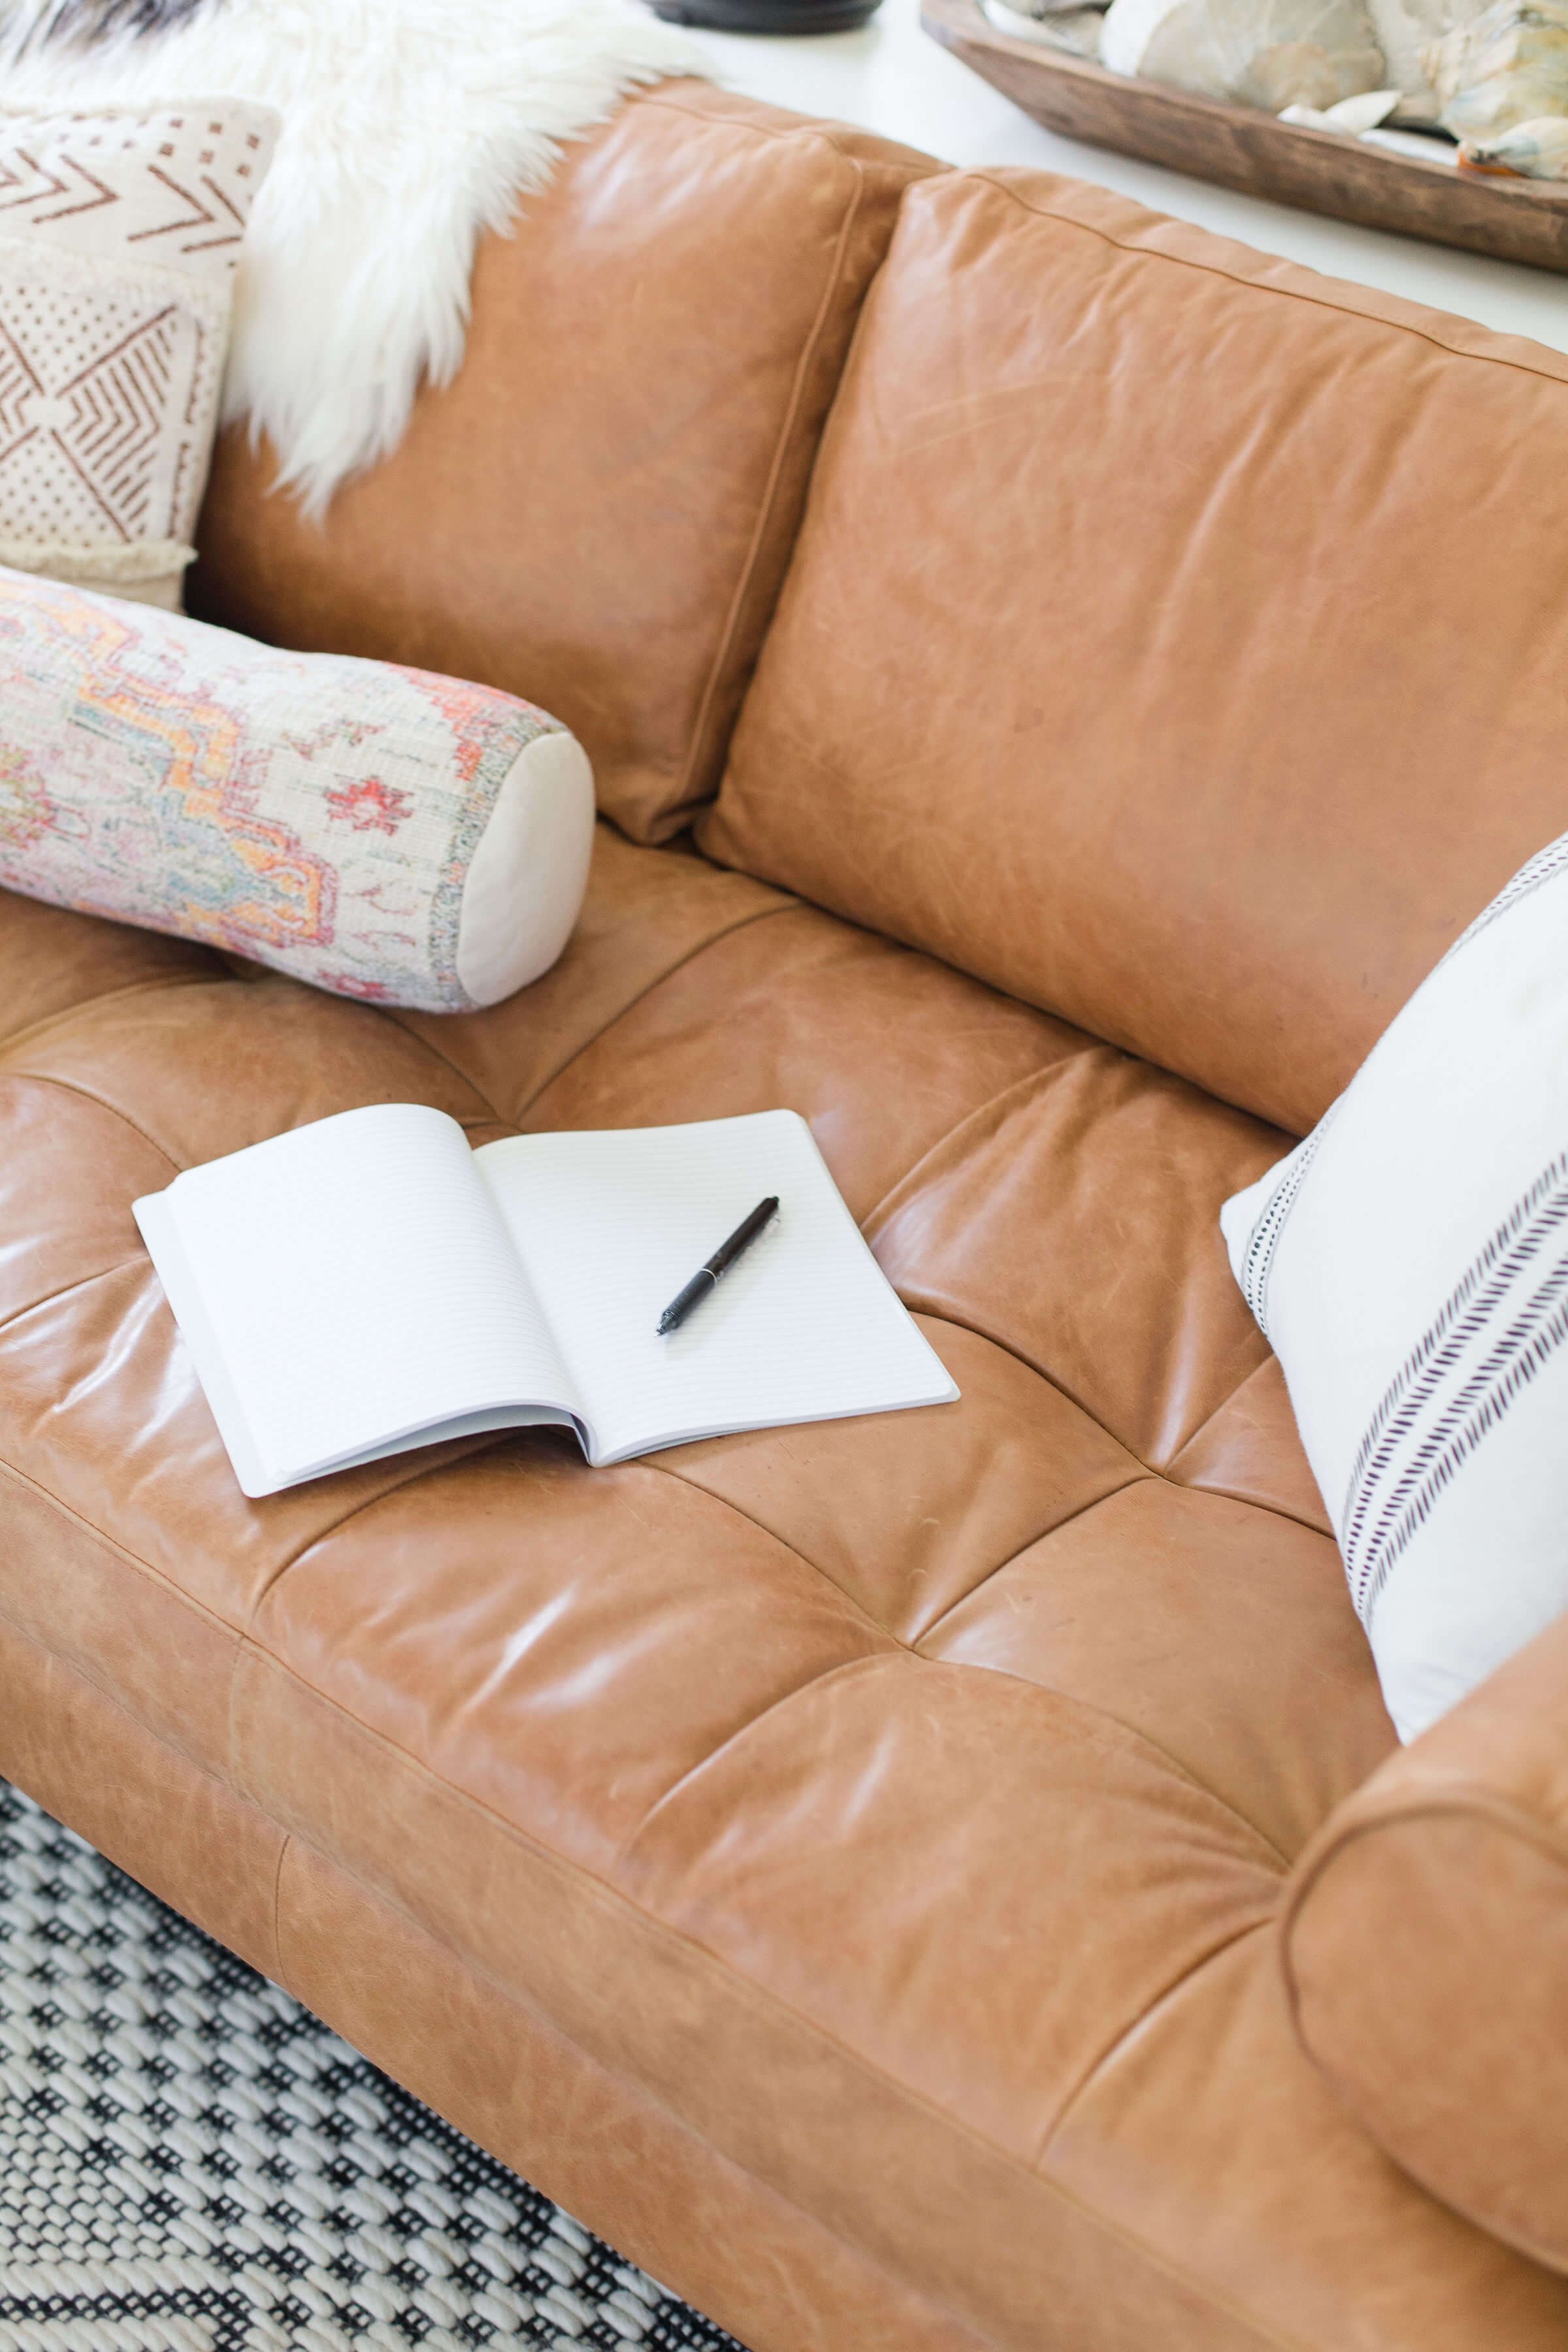 light brown leather couch with an open notebook and pen laying on it. Pillows and blankets in the background